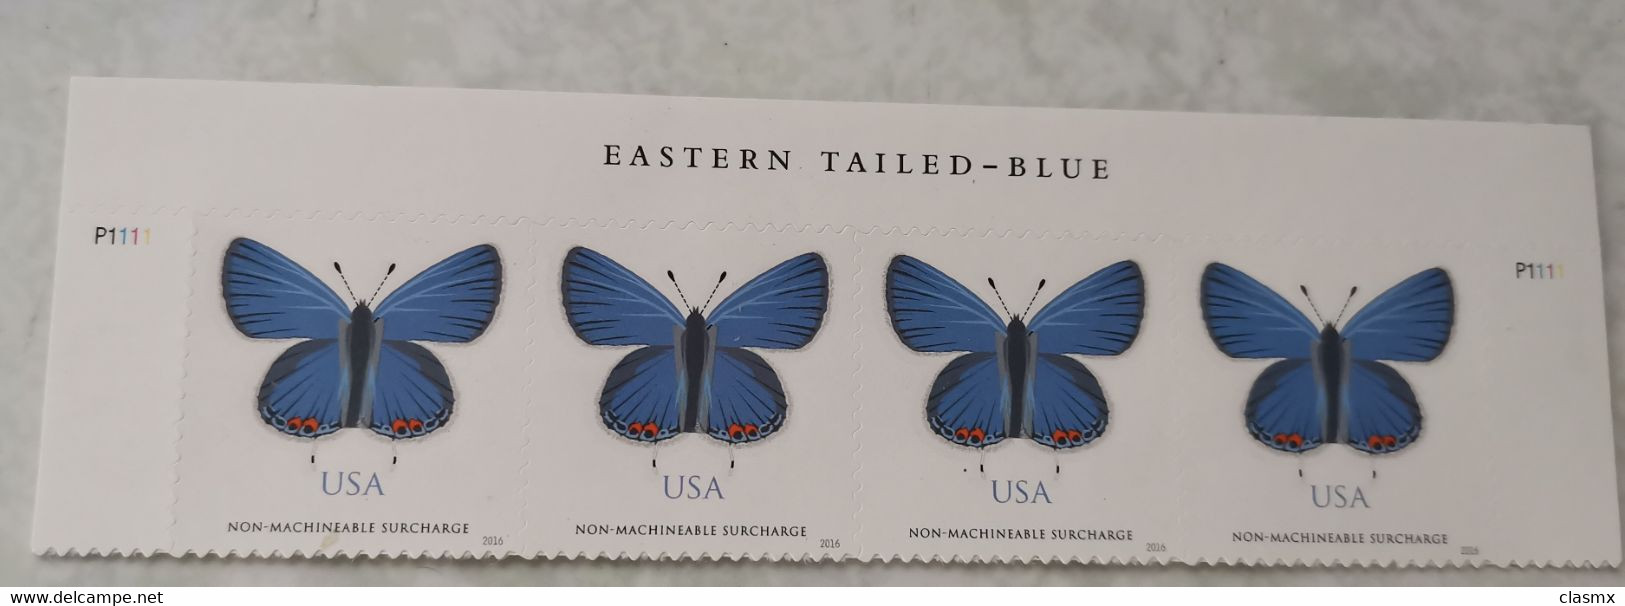 USA Blue Butterflies STAMPS MNH EASTERN TILED BLUE - Unused Stamps